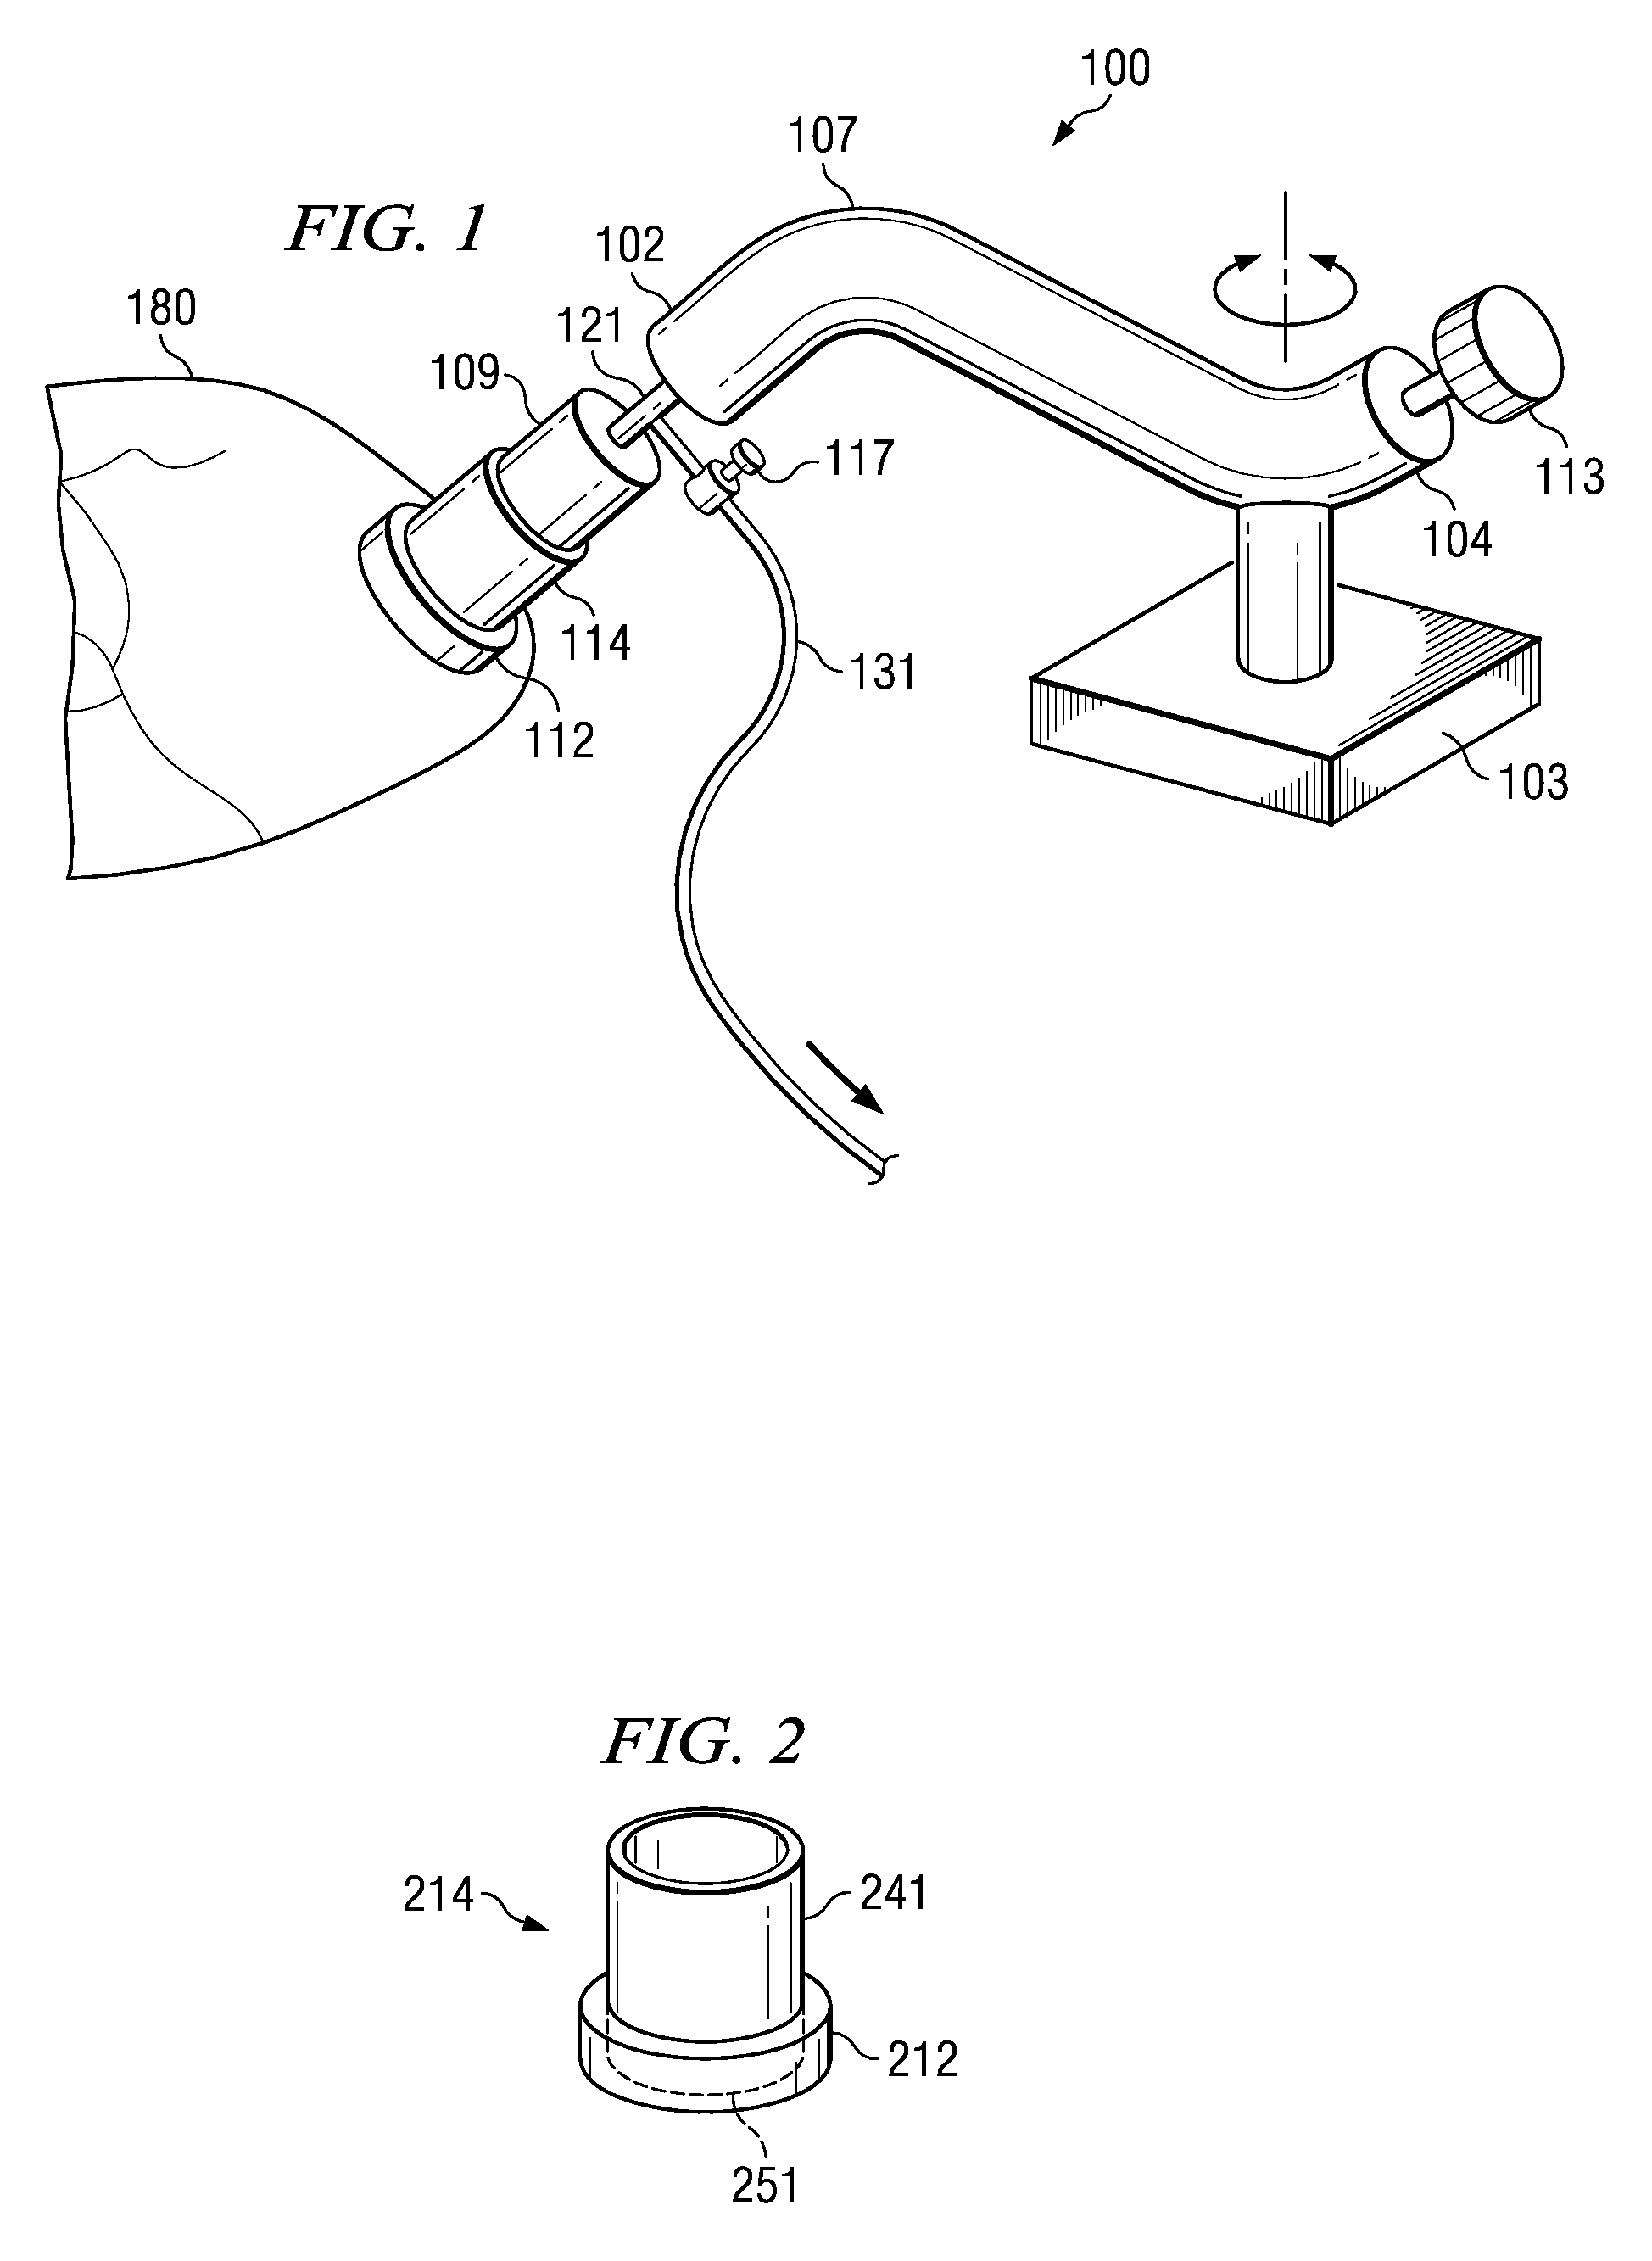 Surgical coring system